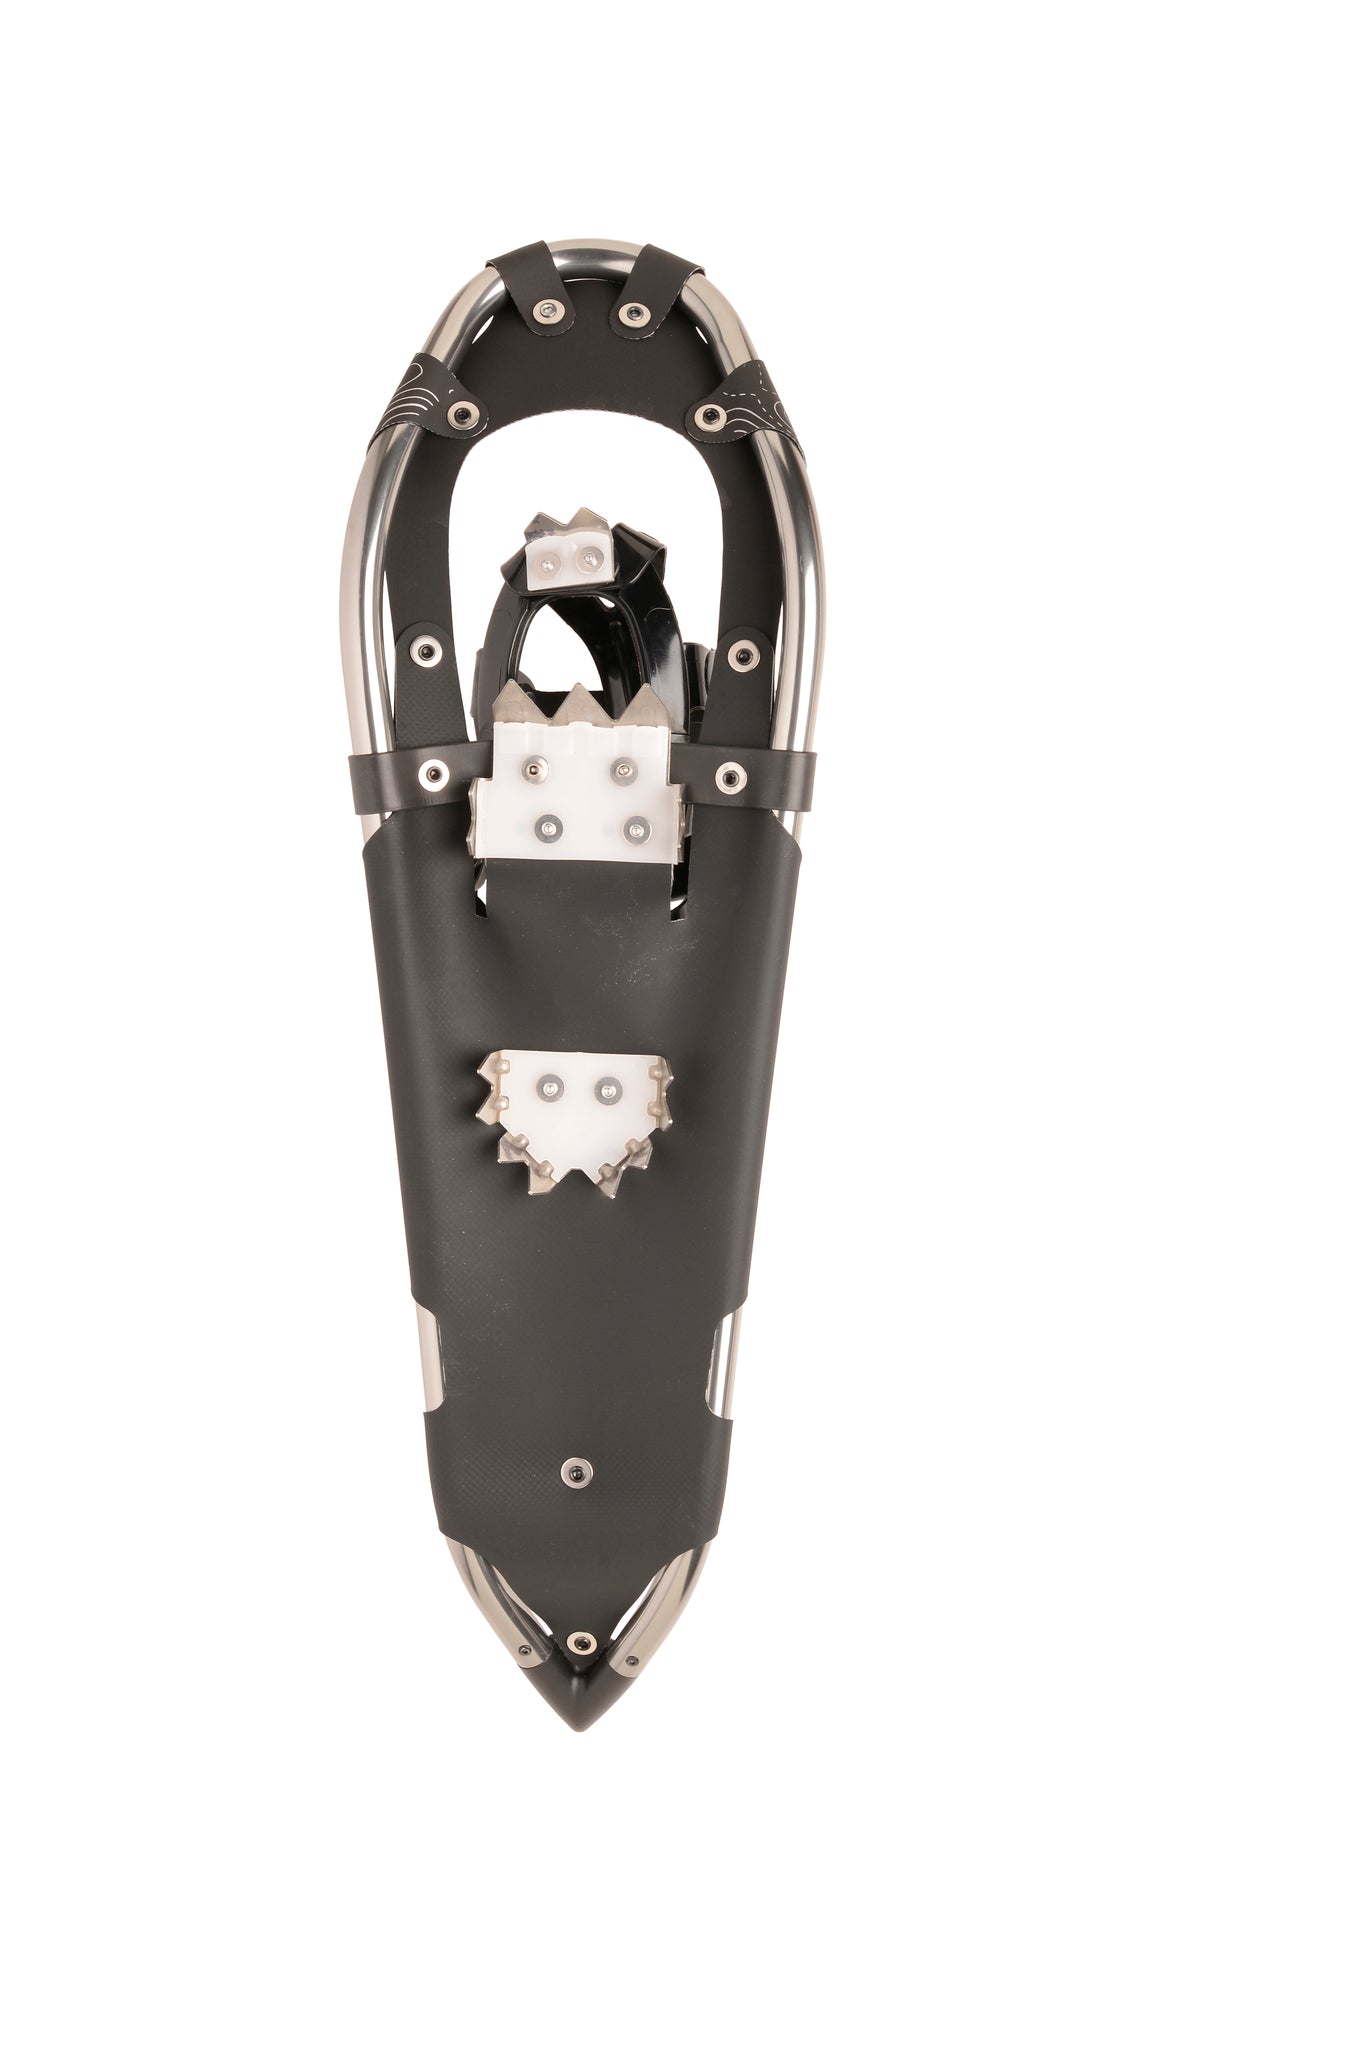 Crescent Moon All-Terrain Gold 9 Silver Snowshoes - Winter 2021/2022